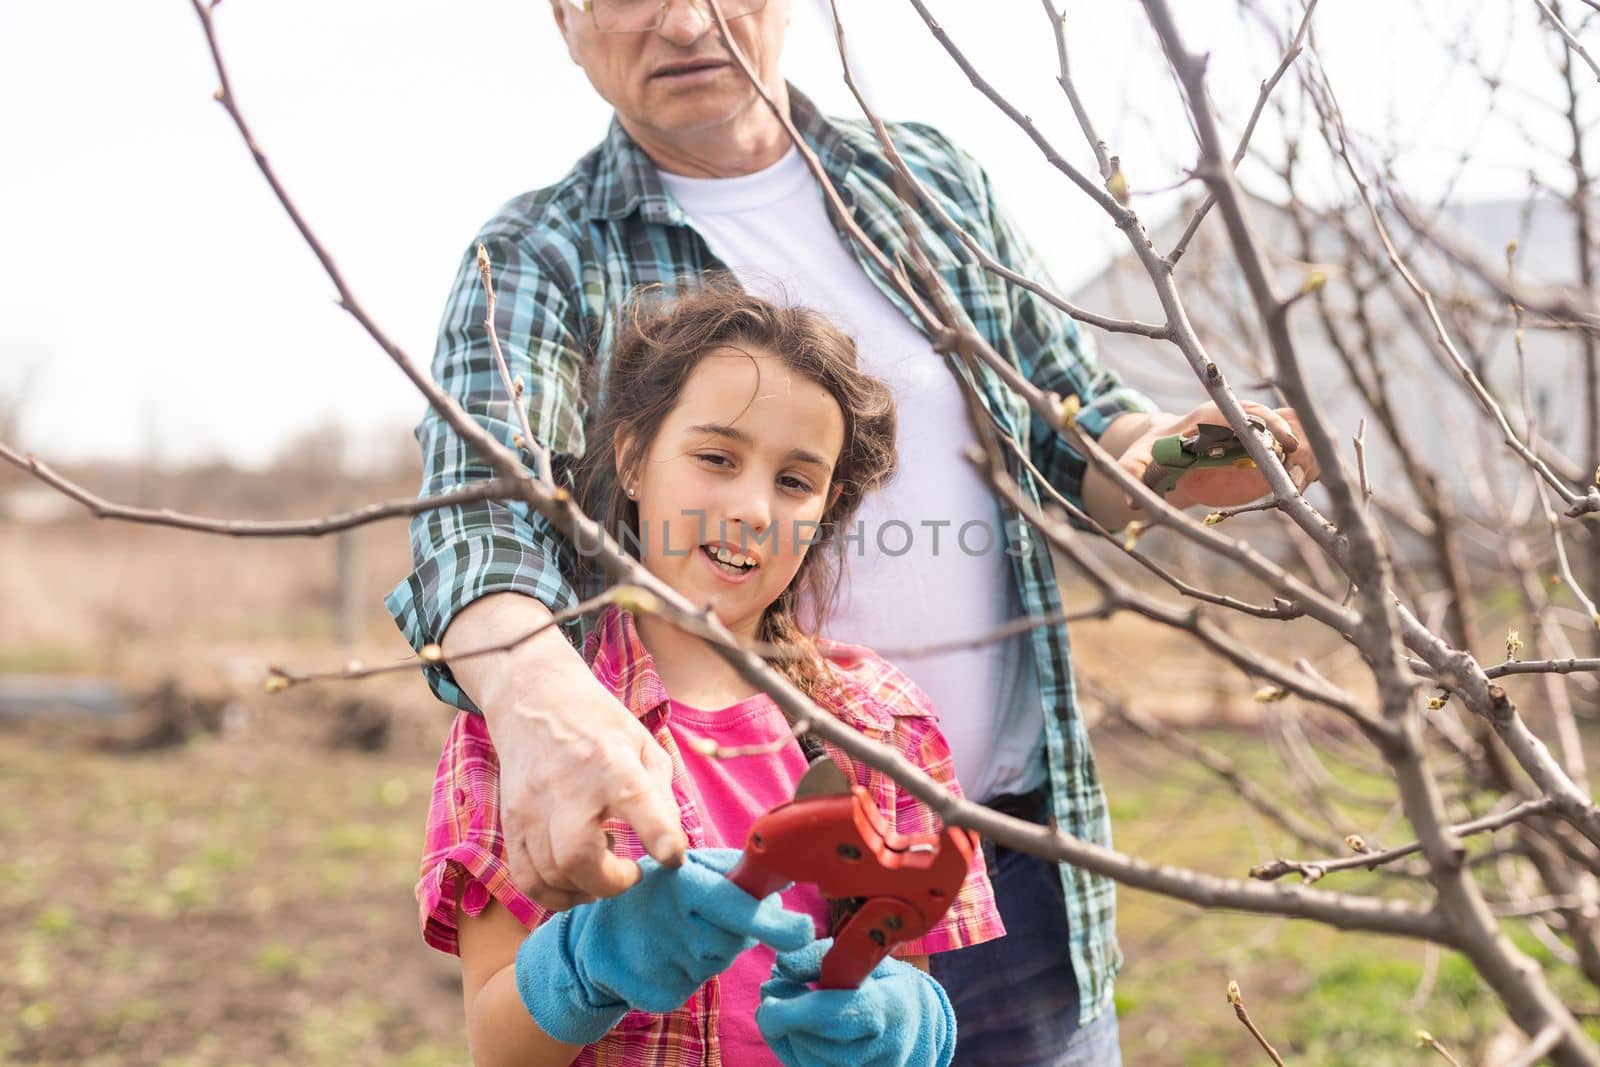 gardening, grandfather and granddaughter in the garden pruning trees by Andelov13